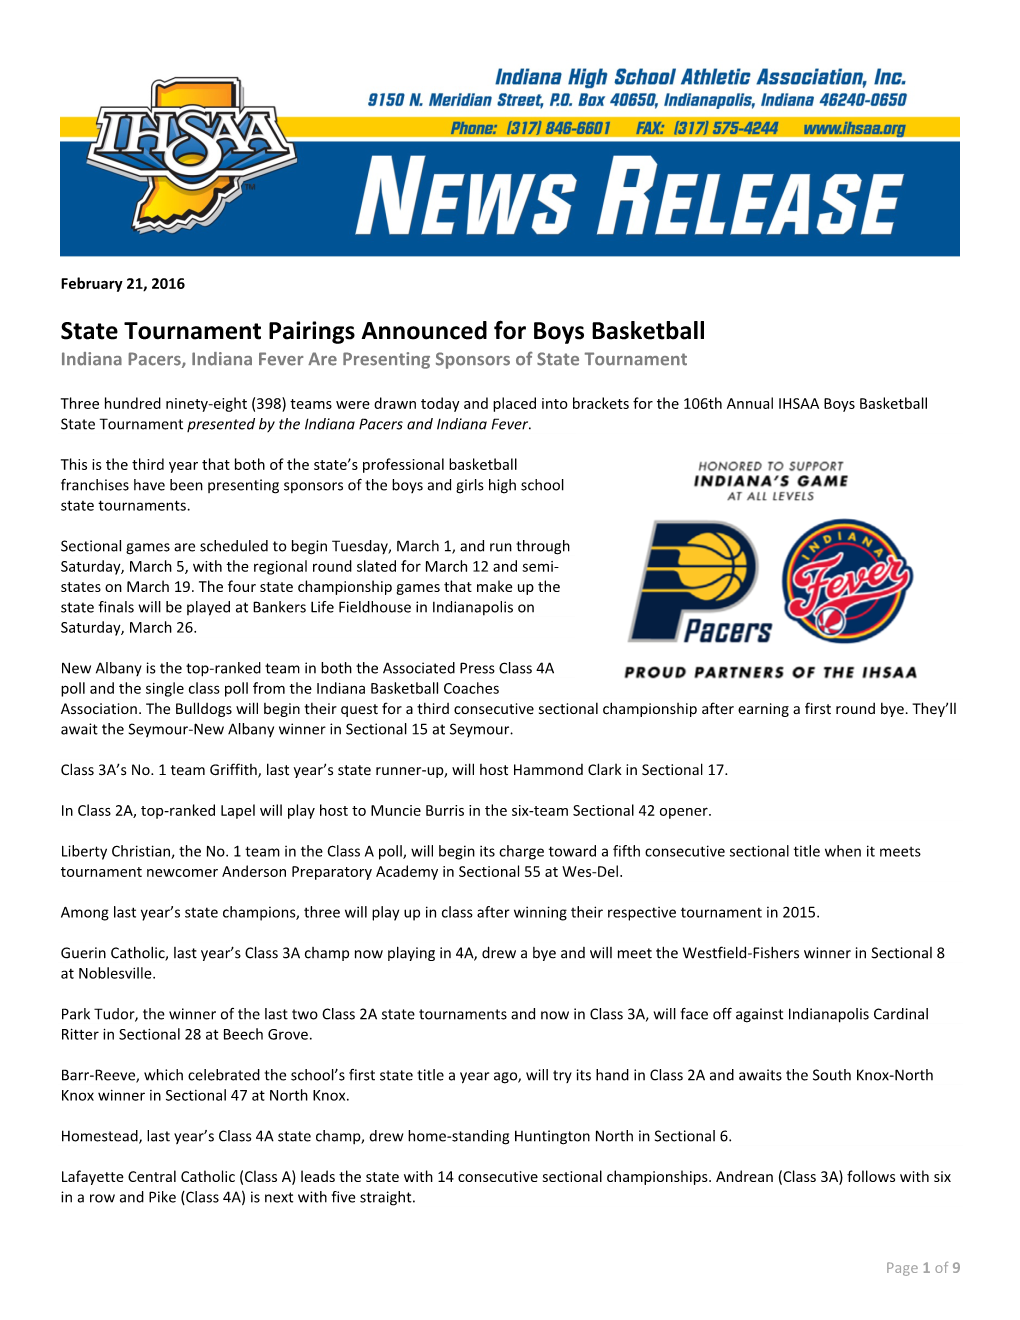 State Tournament Pairings Announced for Boys Basketball Indiana Pacers, Indiana Fever Are Presenting Sponsors of State Tournament